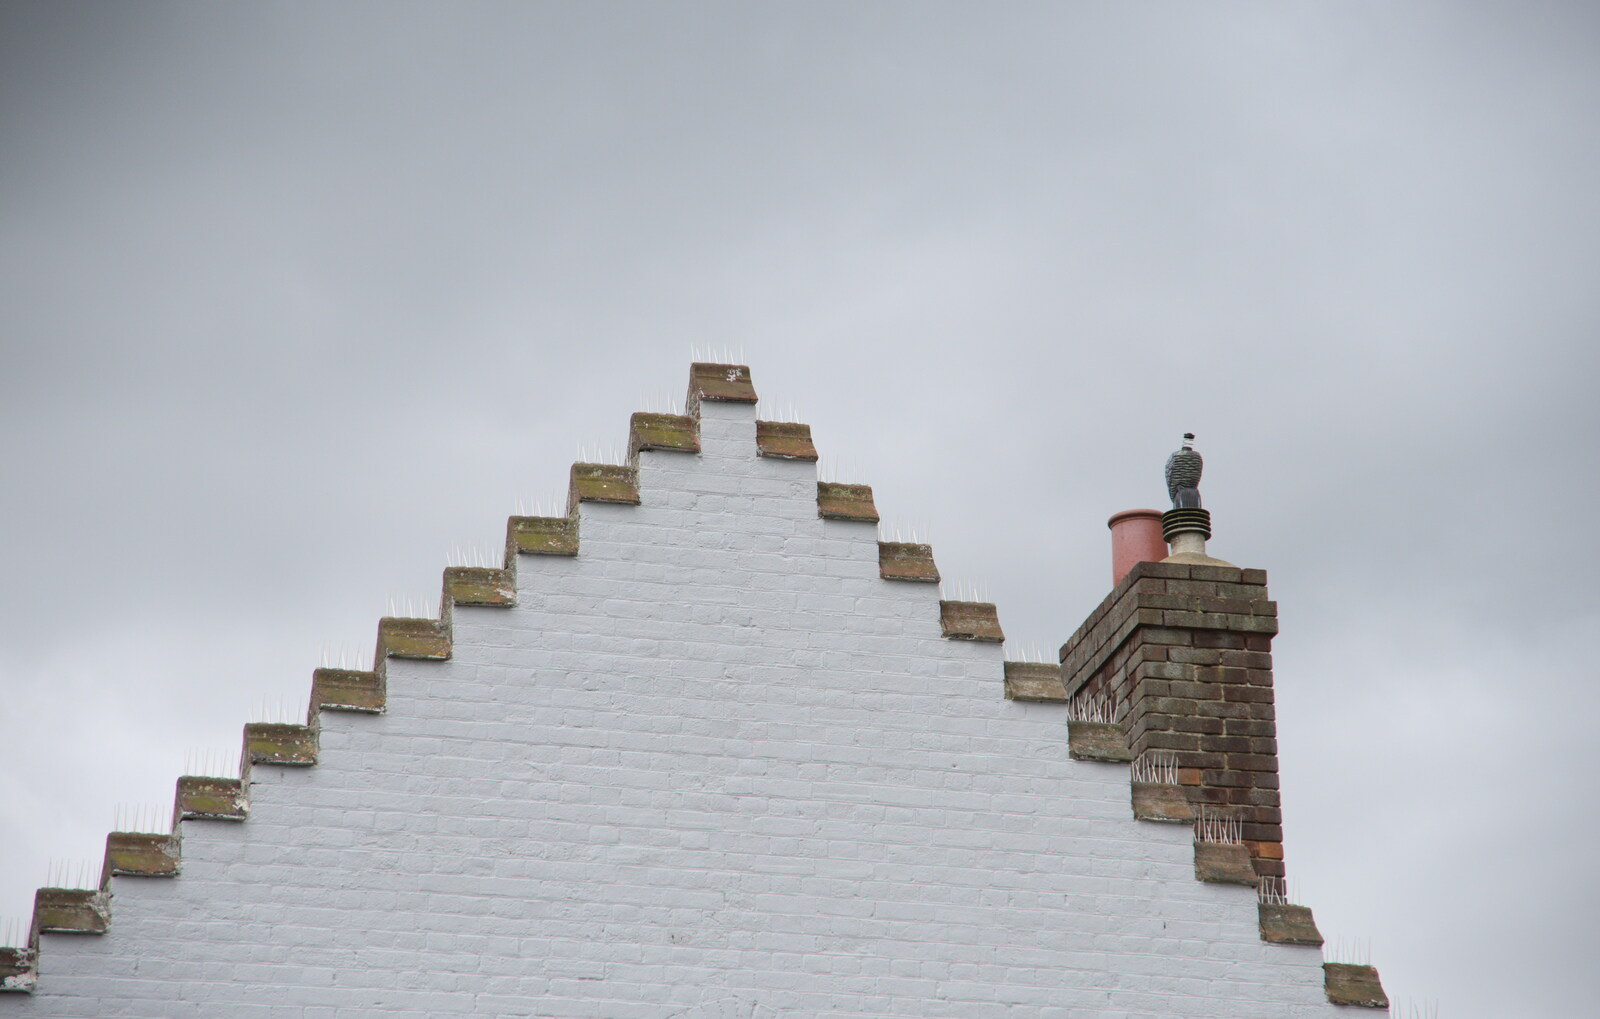 A Dutch-style gable end from Camping on the Coast, East Runton, North Norfolk - 25th July 2020